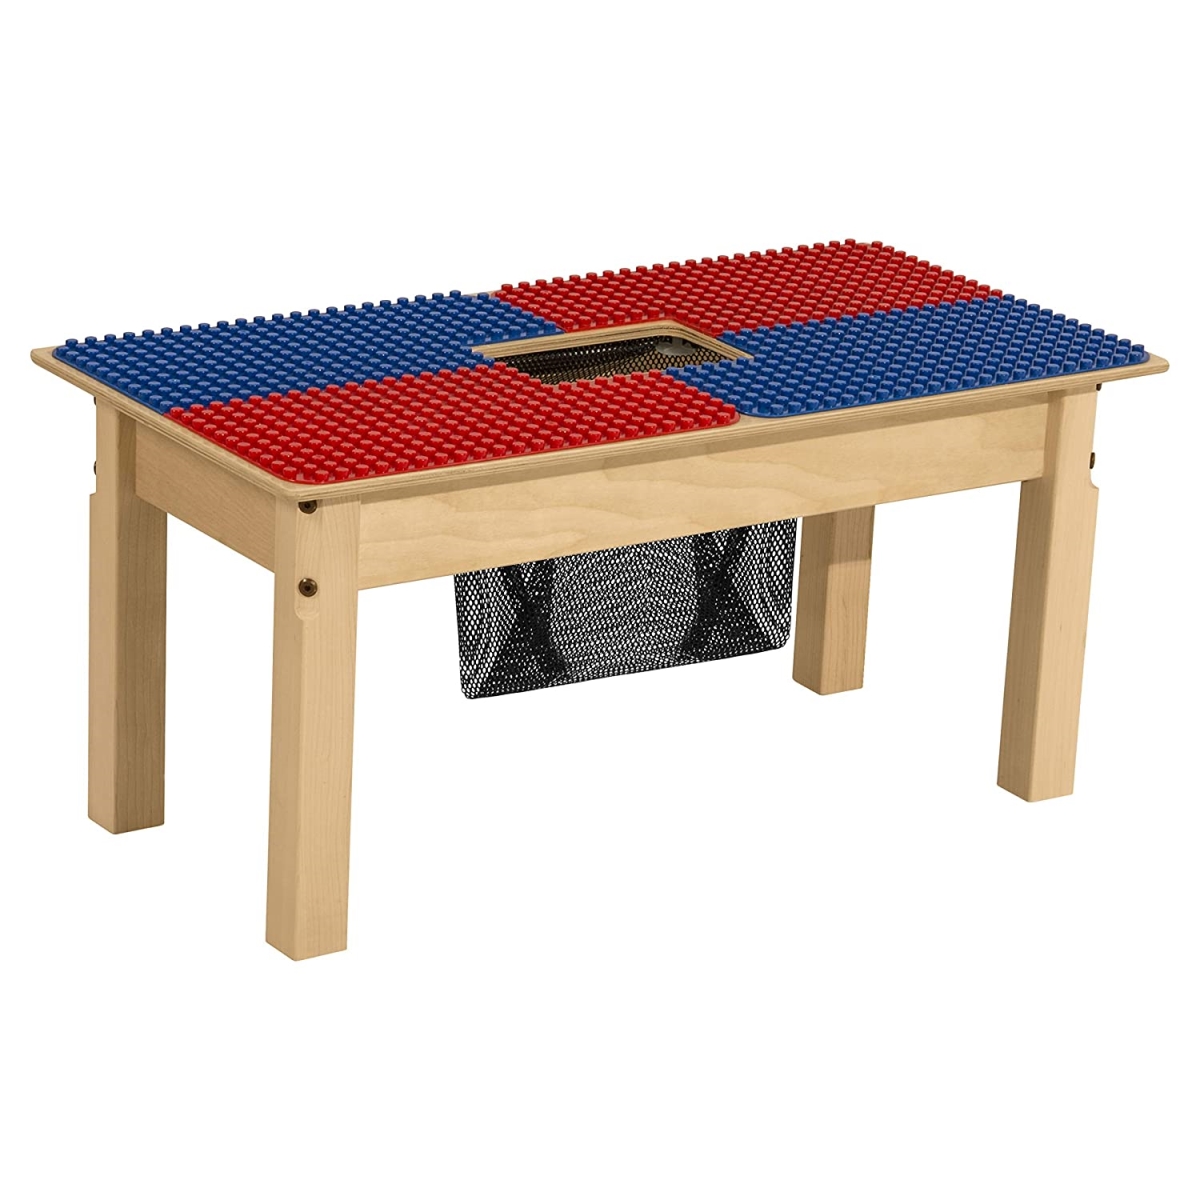 Tp1631pgna1829-br 18-29 In. Duplo Compatible Table With Adjustable Legs, Blue & Red - Square